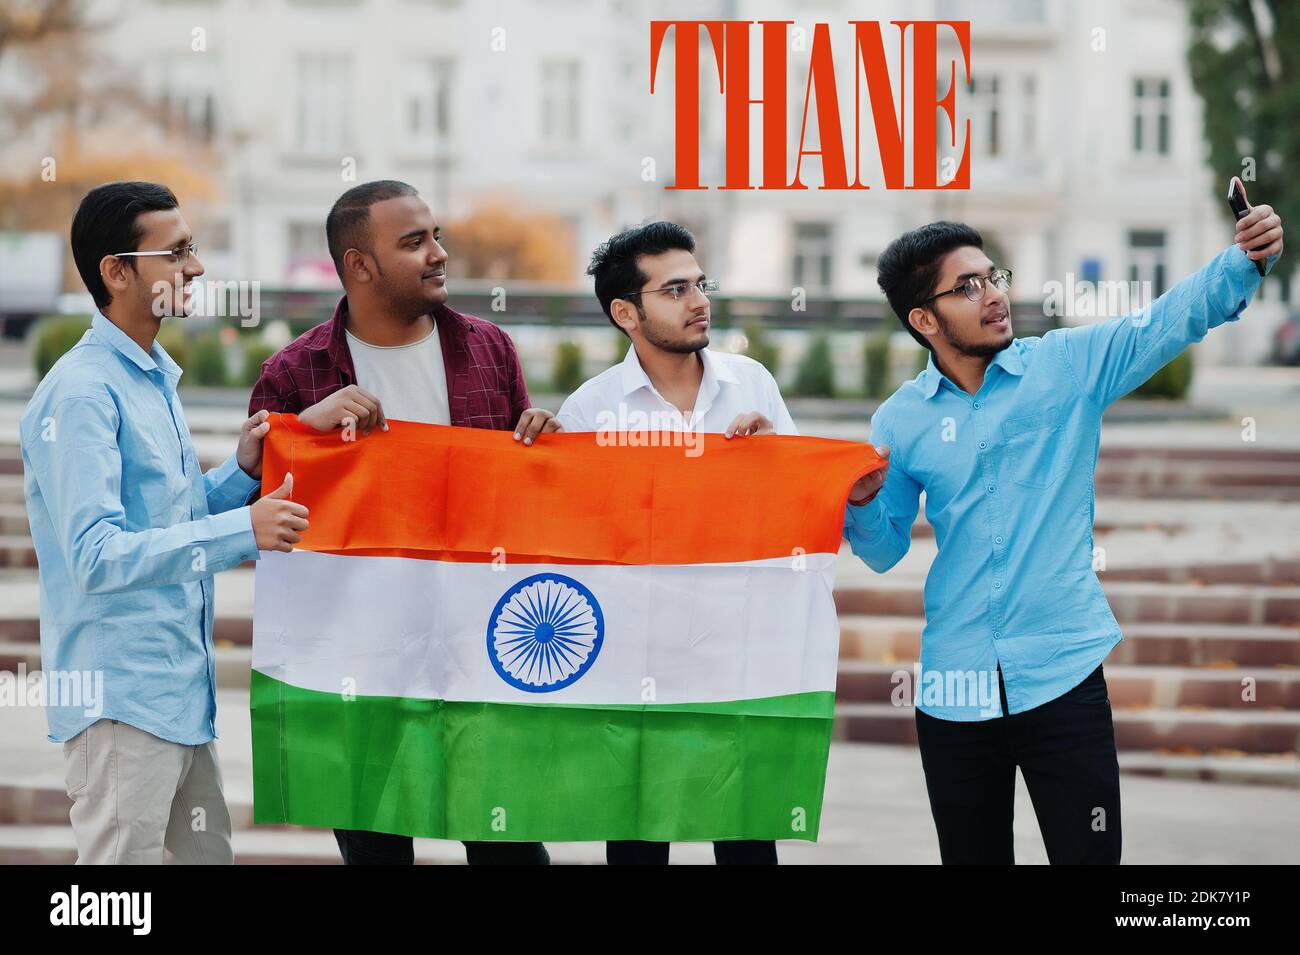 Thane city inscription. Group of four indian male friends with India flag making selfie on mobile phone. Largest India cities concept. Stock Photo